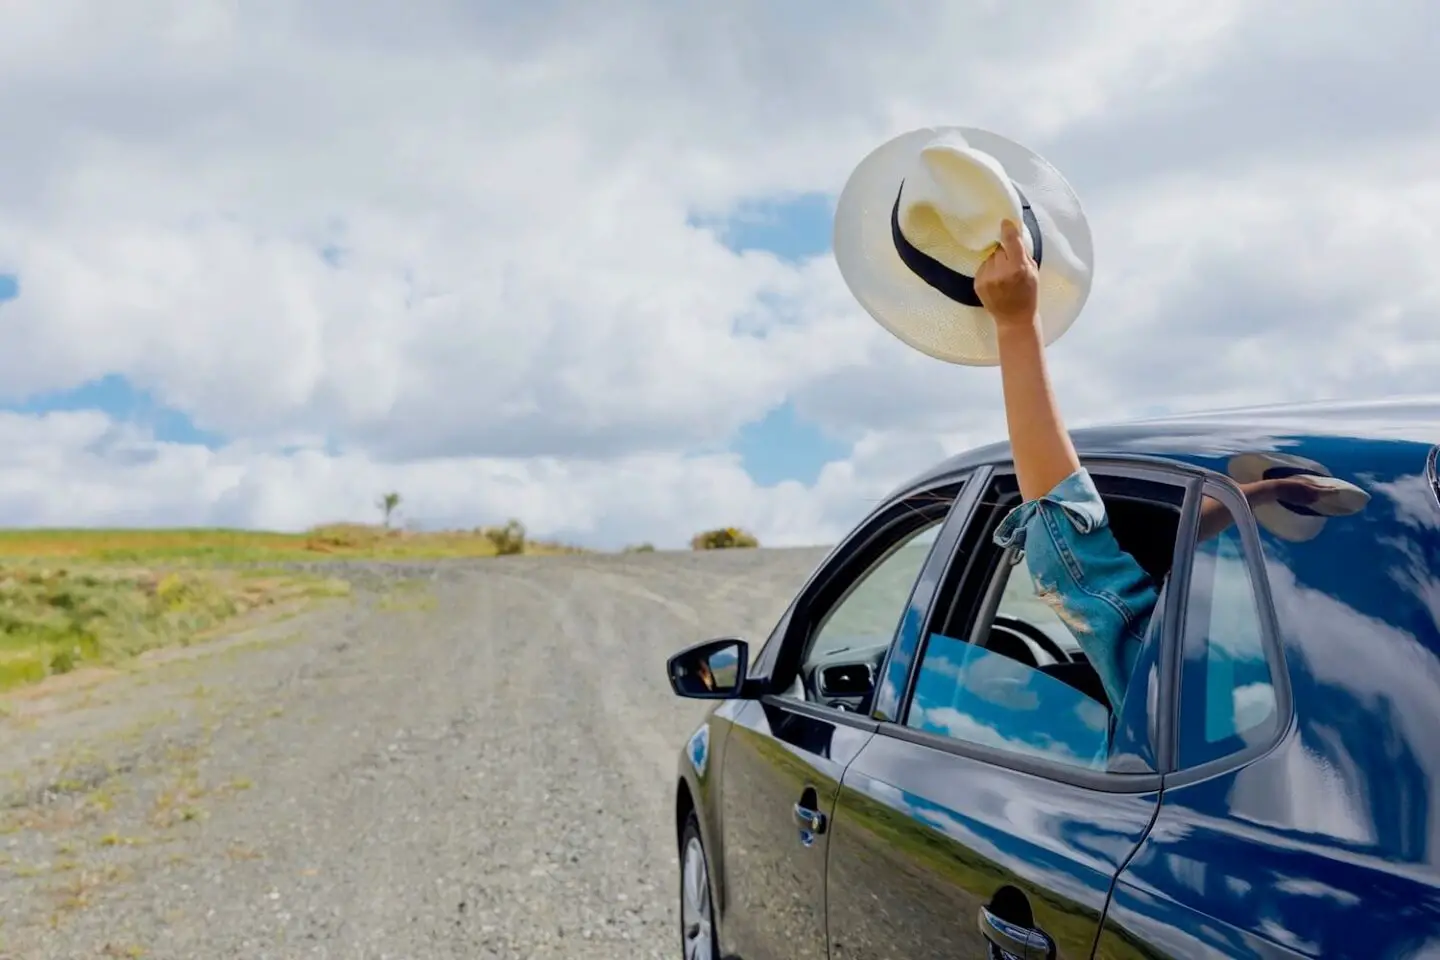 A blue car on a road in the countryside. An arm is coming out of the bar window holding a panama hat